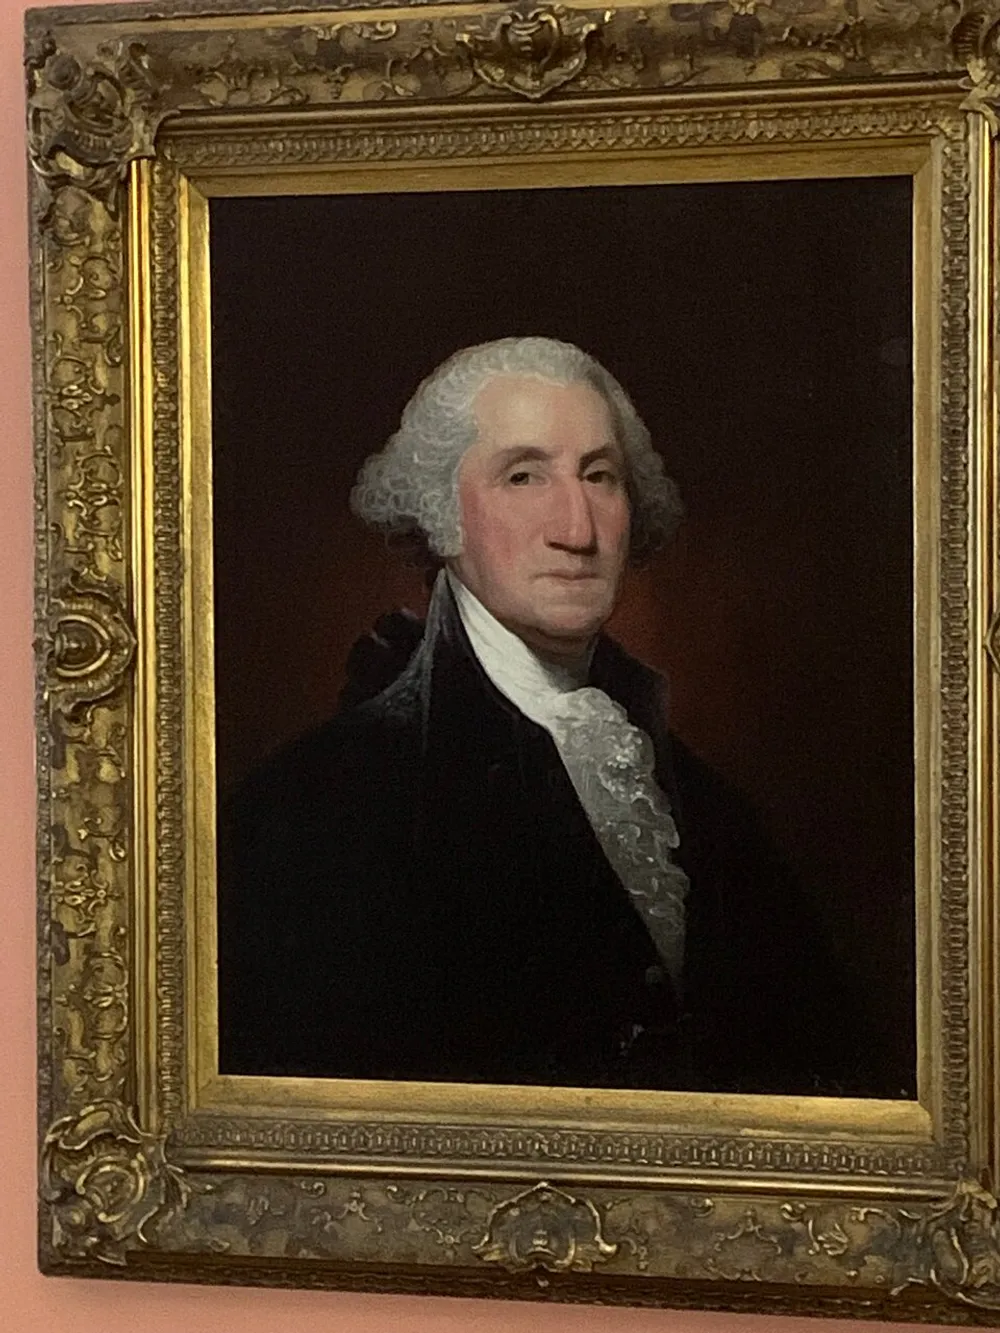 The image shows a framed portrait of a historical figure with white hair and a black coat set against a dark background within an ornate gold frame